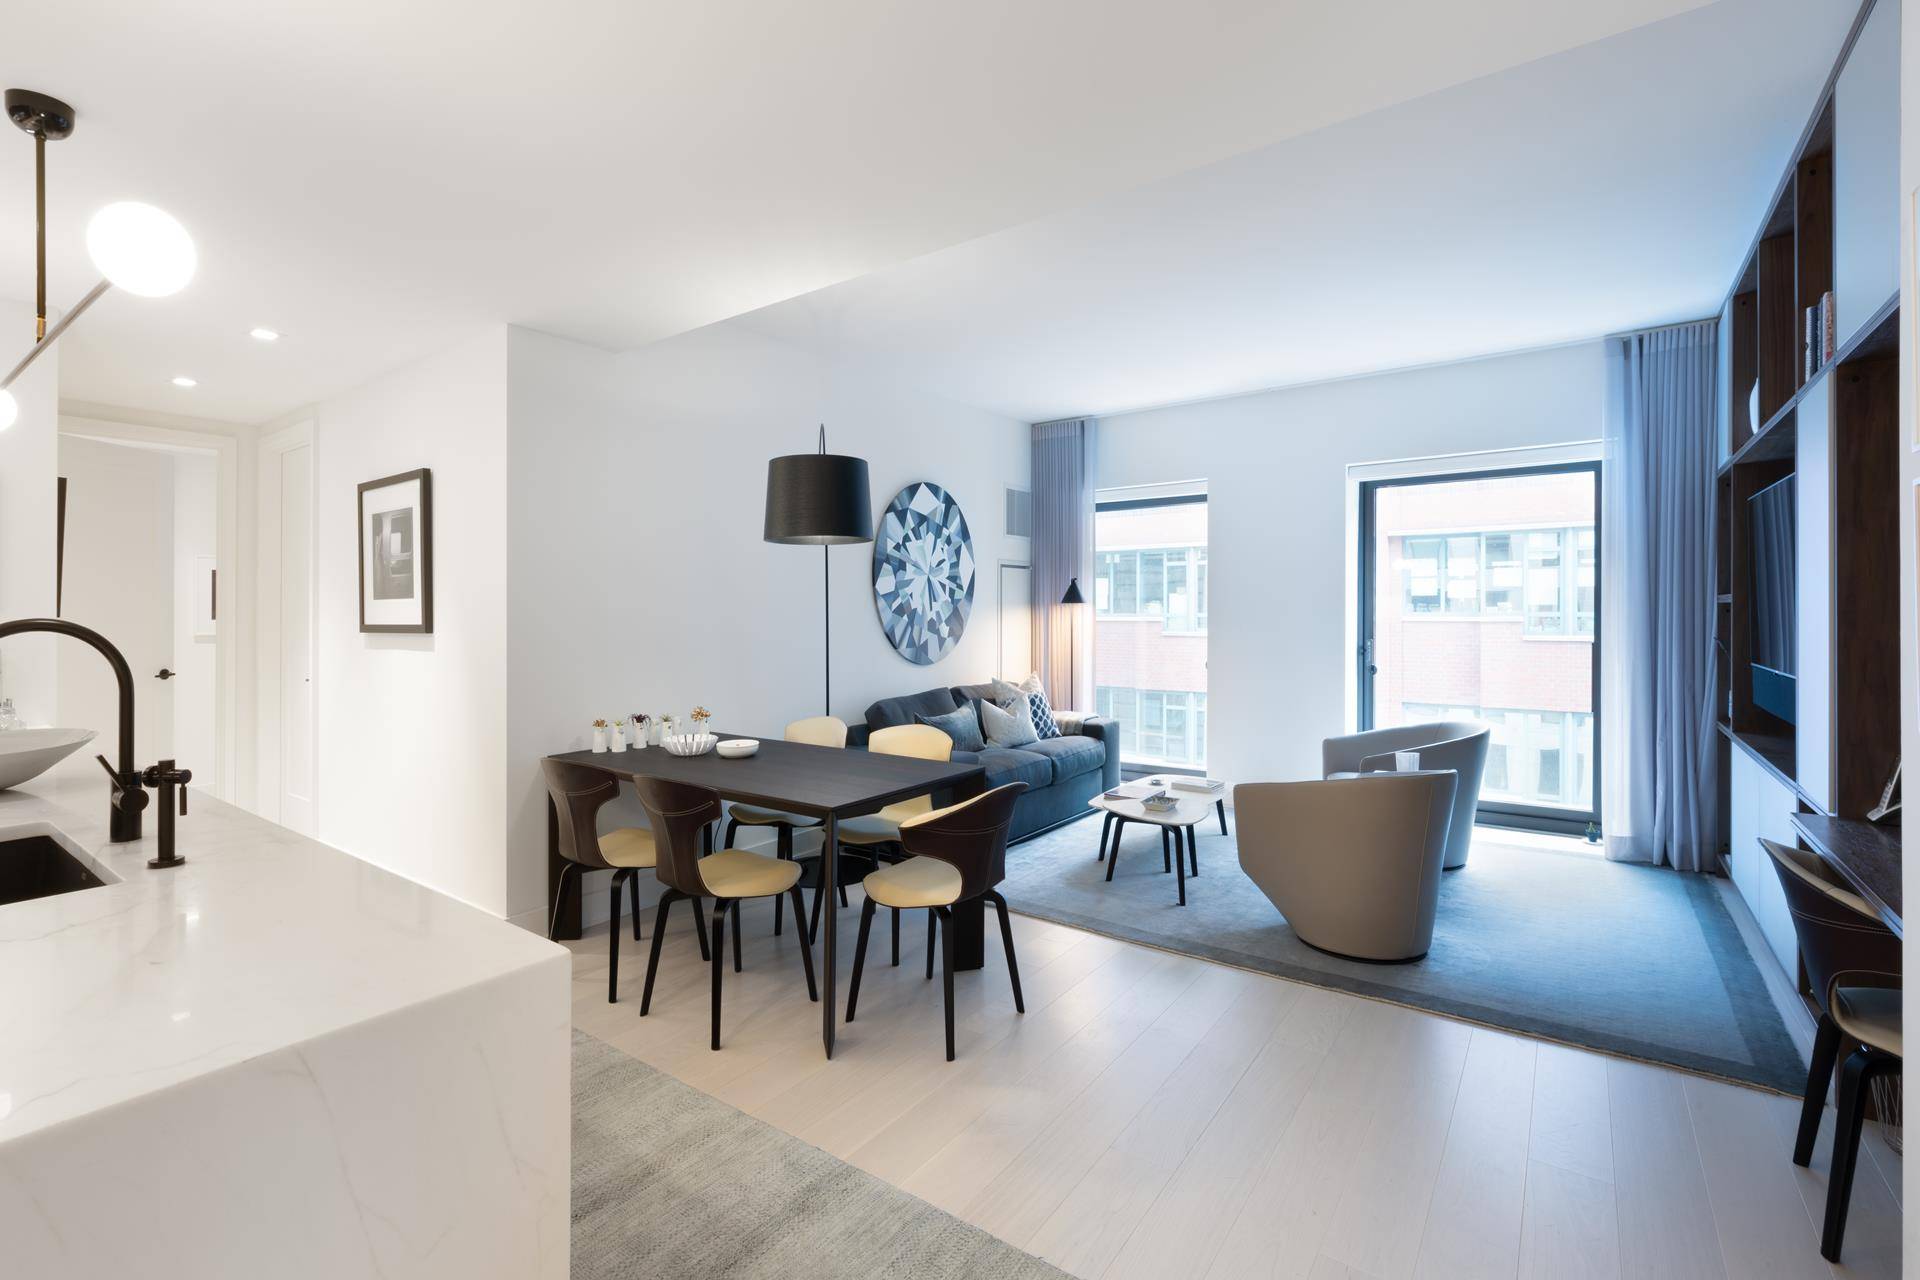 Located conveniently between Union Square, Chelsea and the Flatiron 55 West 17th is a beautifully designed brand new luxury condominium building by Toll Brothers.